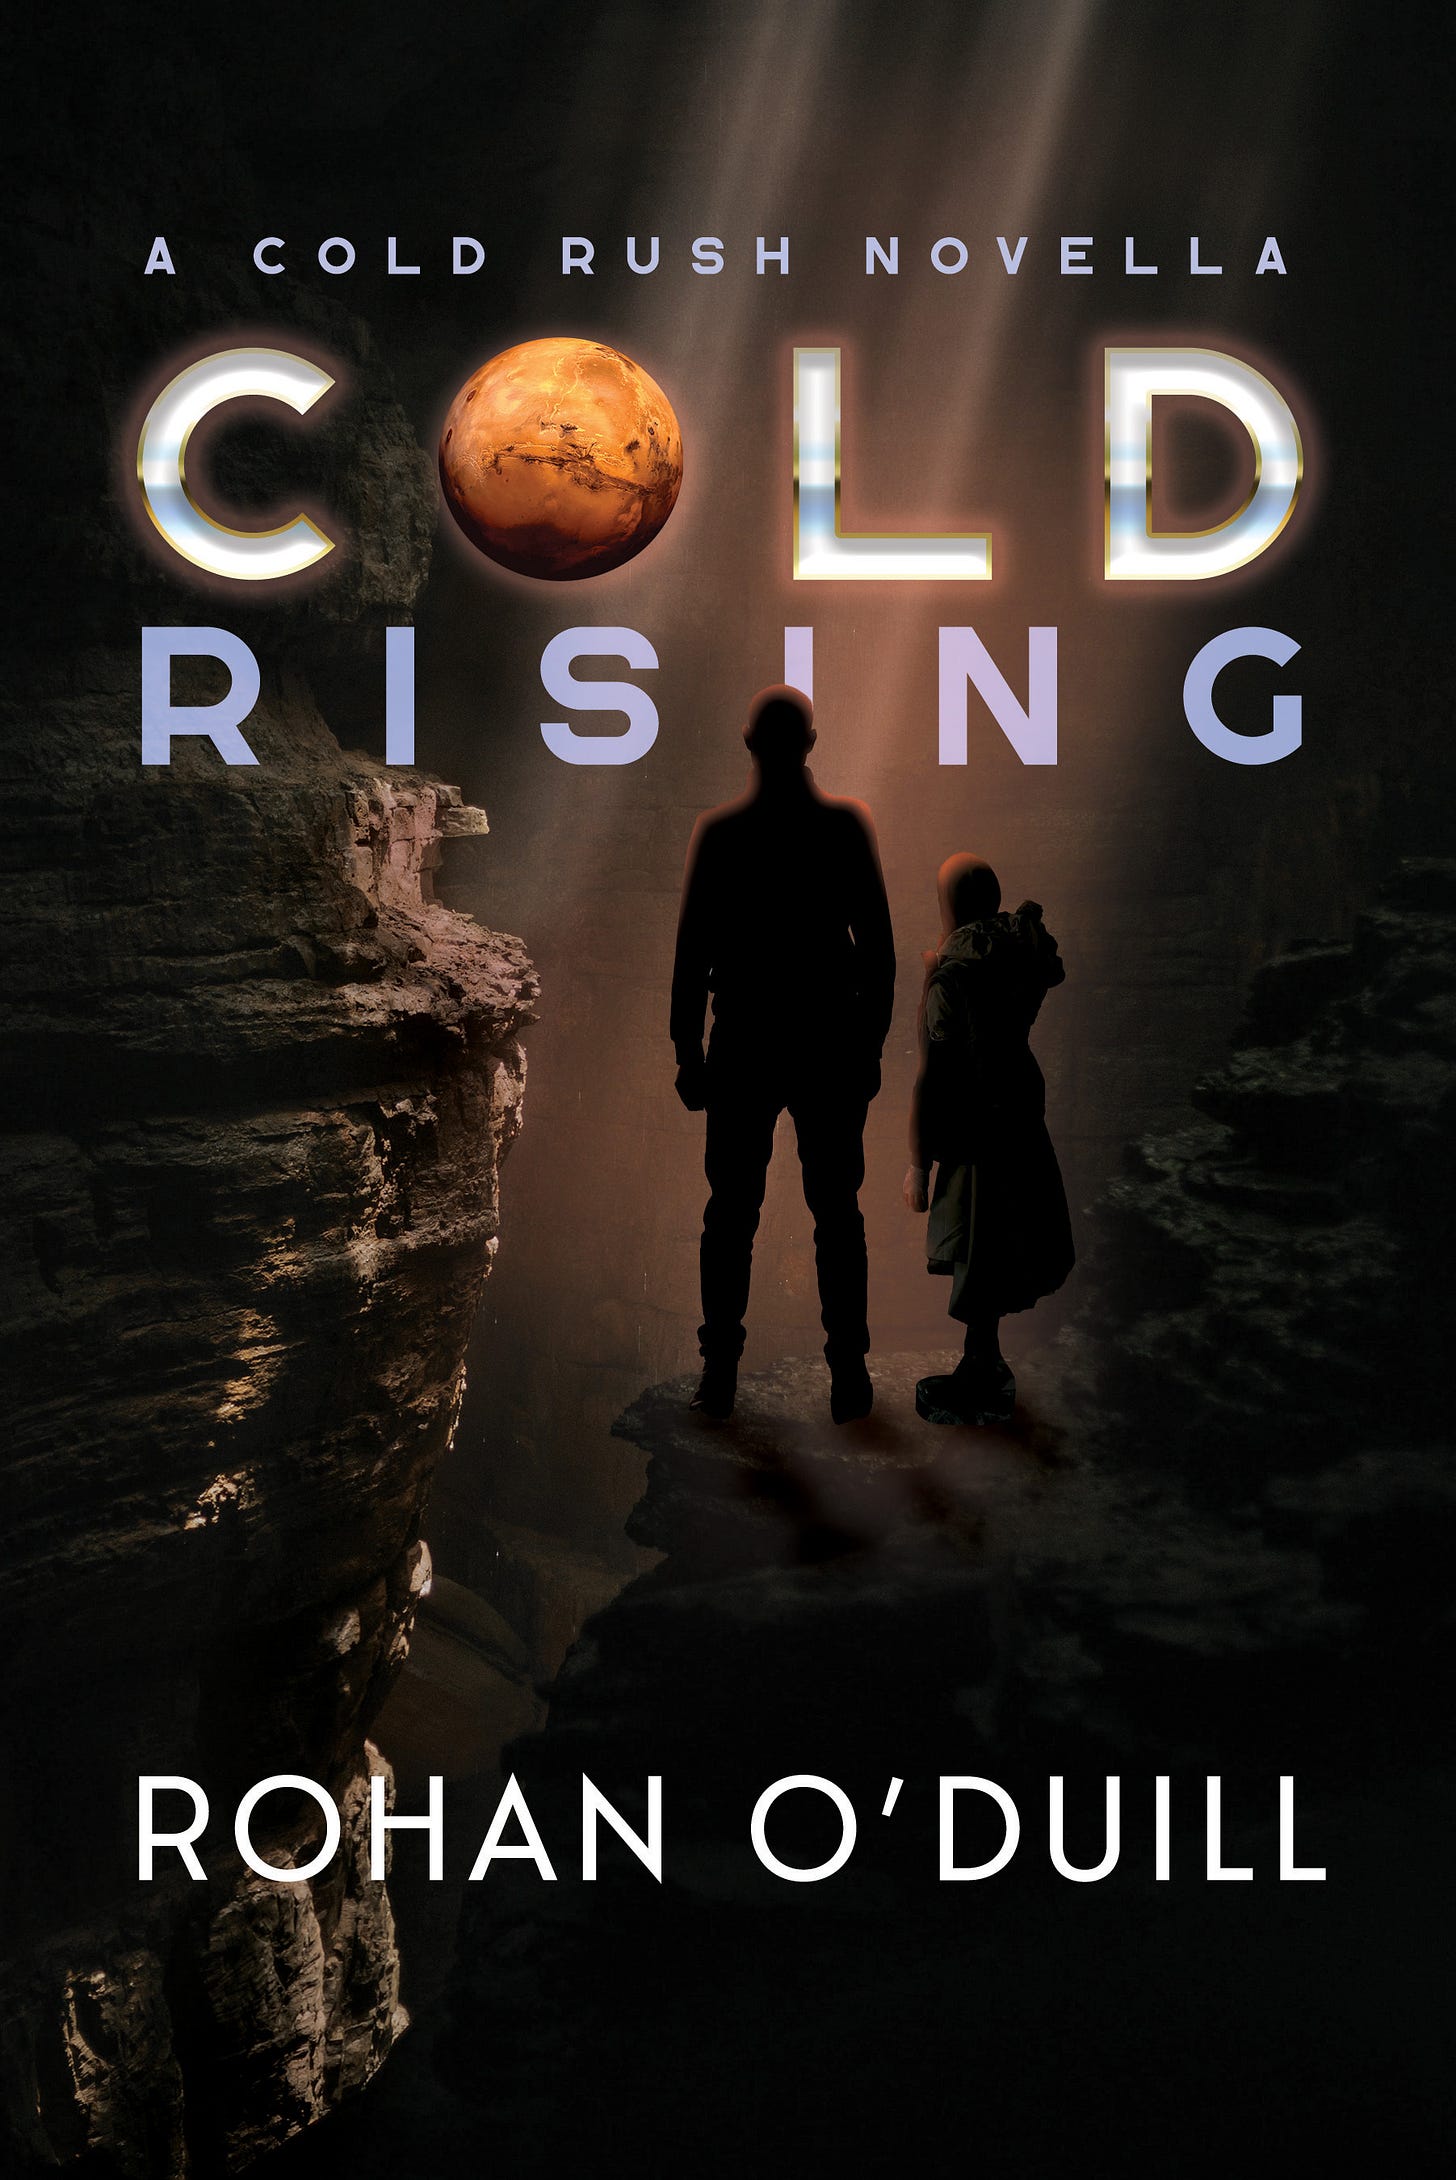 cold rising: a cold rush novella by Rohan O'Duill. A dark view of a Martian cavern with two figures, one tall and bald, the other a small child.